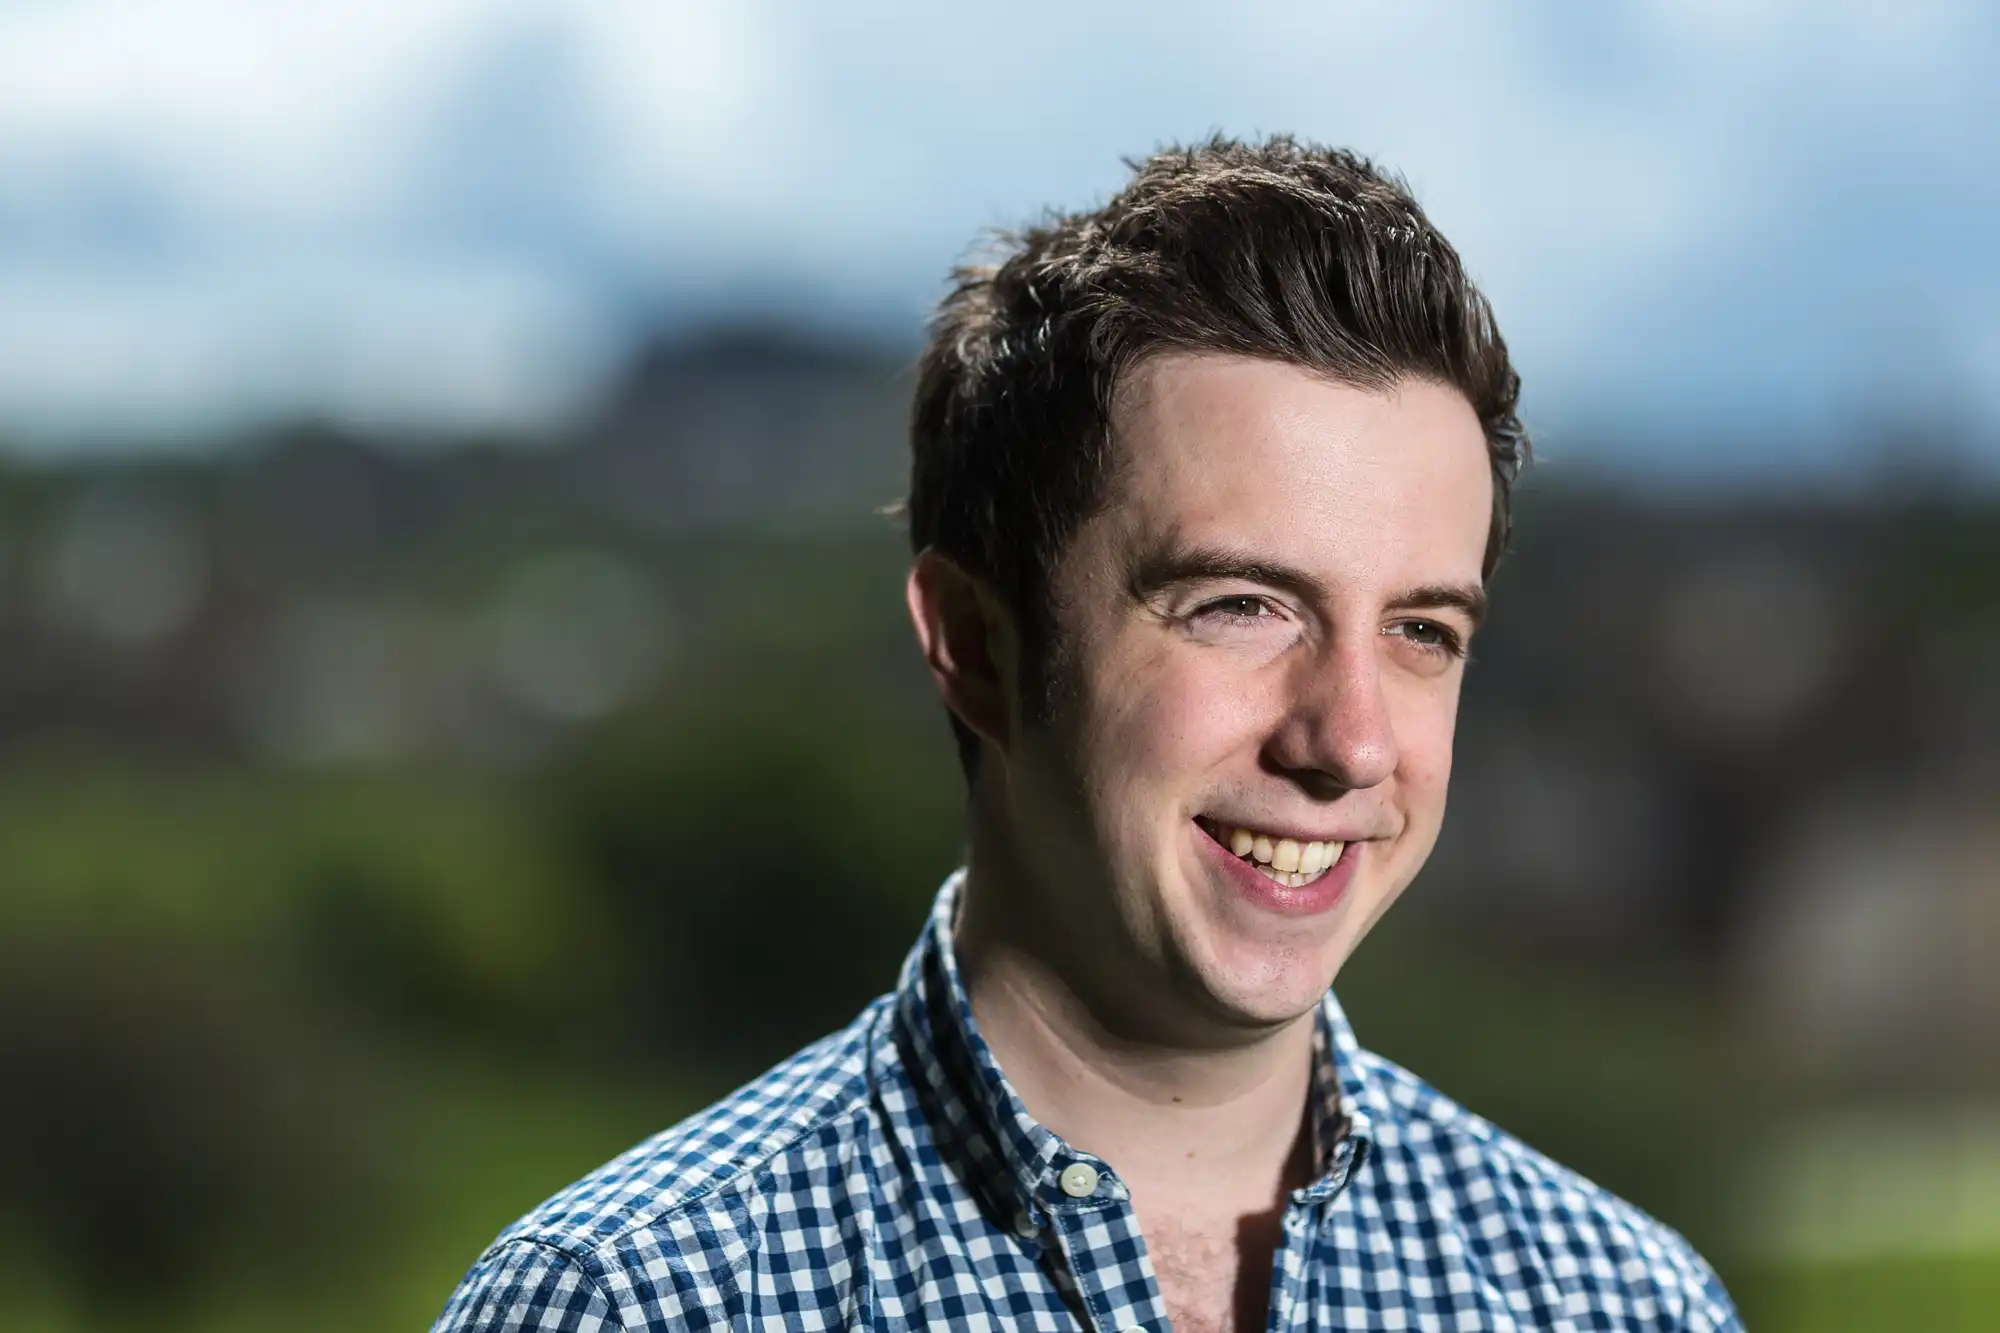 Smiling man in a blue checked shirt with a blurred natural background.